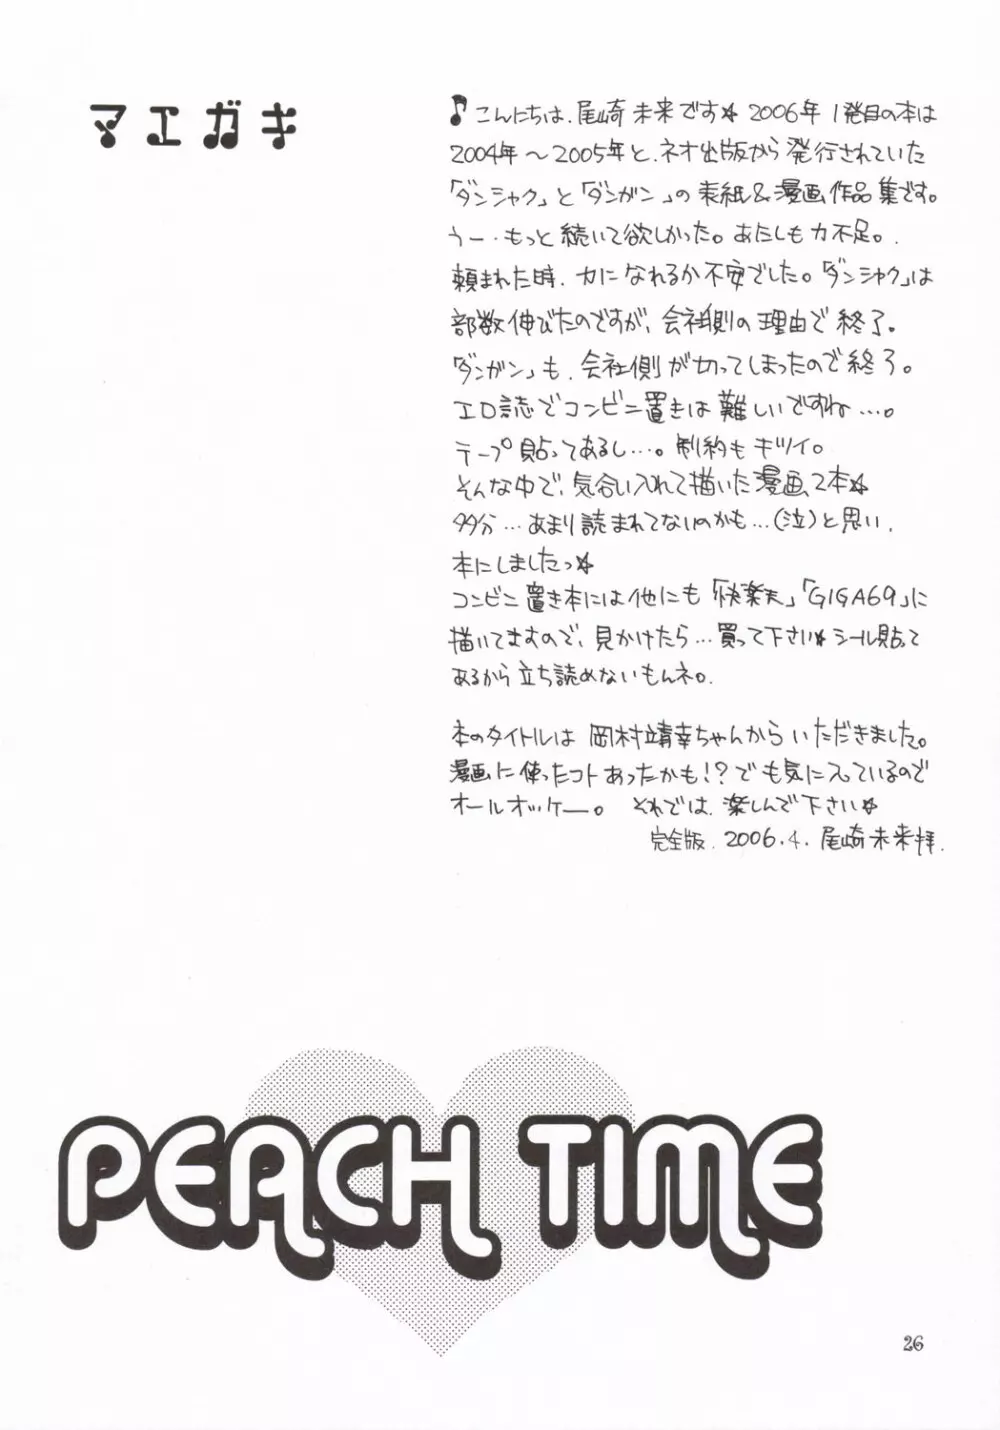 PEACH TIME - page23